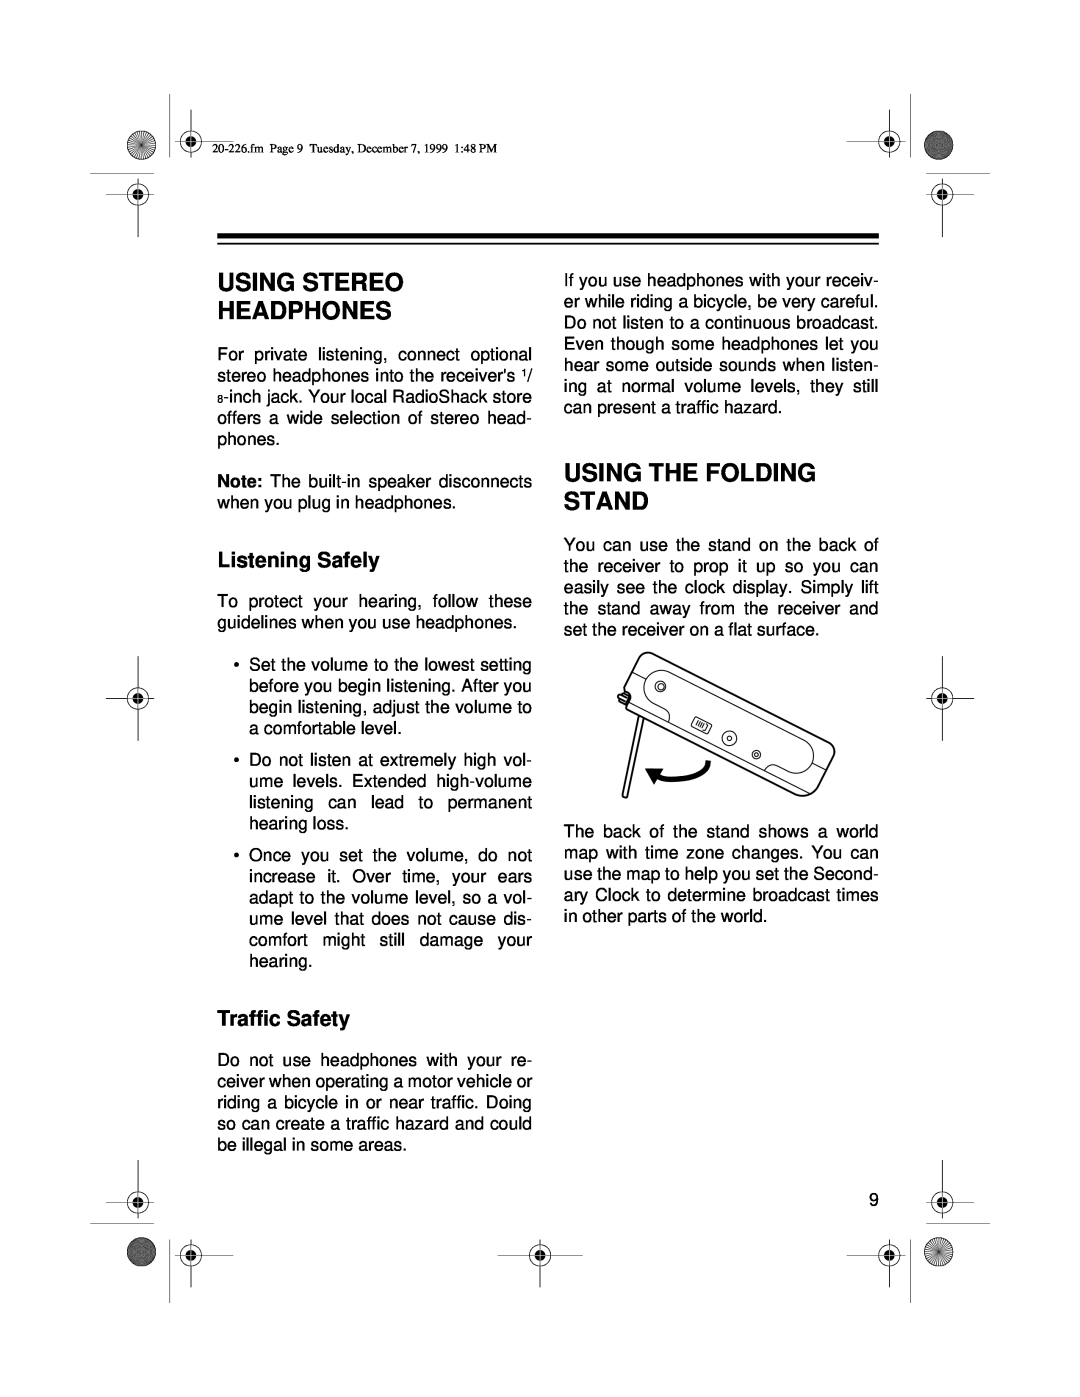 Radio Shack DX-396 owner manual Using Stereo Headphones, Using The Folding Stand, Listening Safely, Traffic Safety 